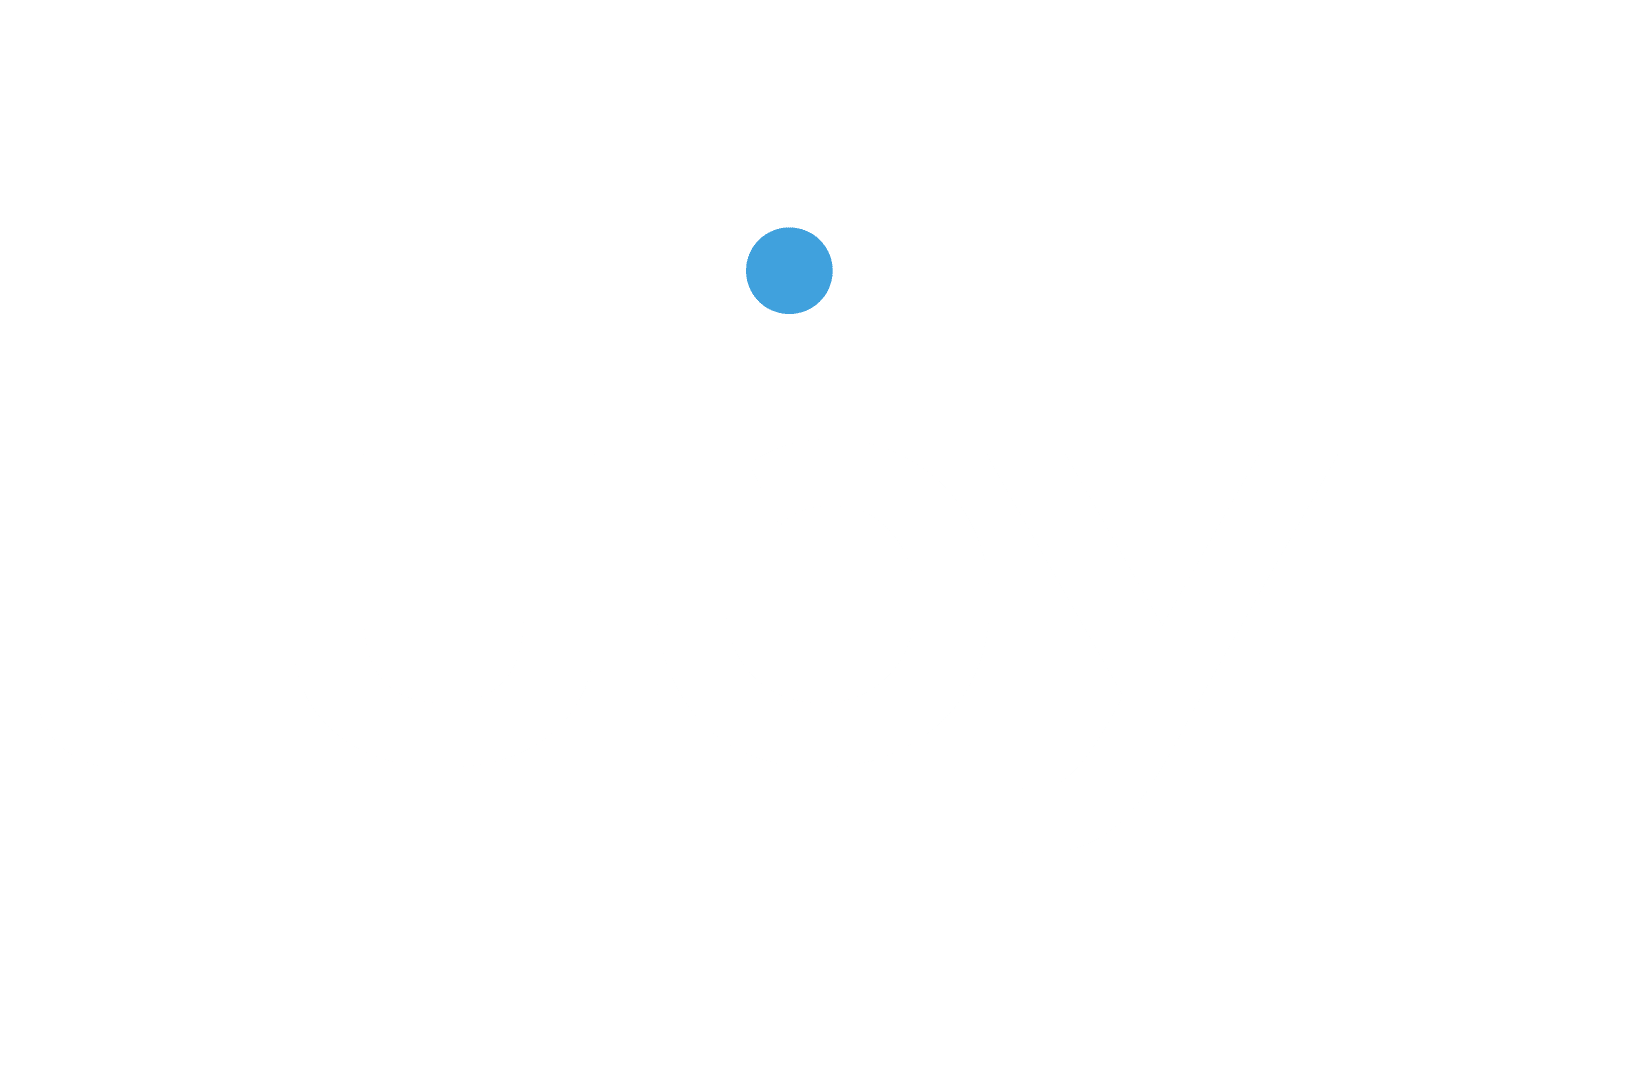 Cases Luby Software